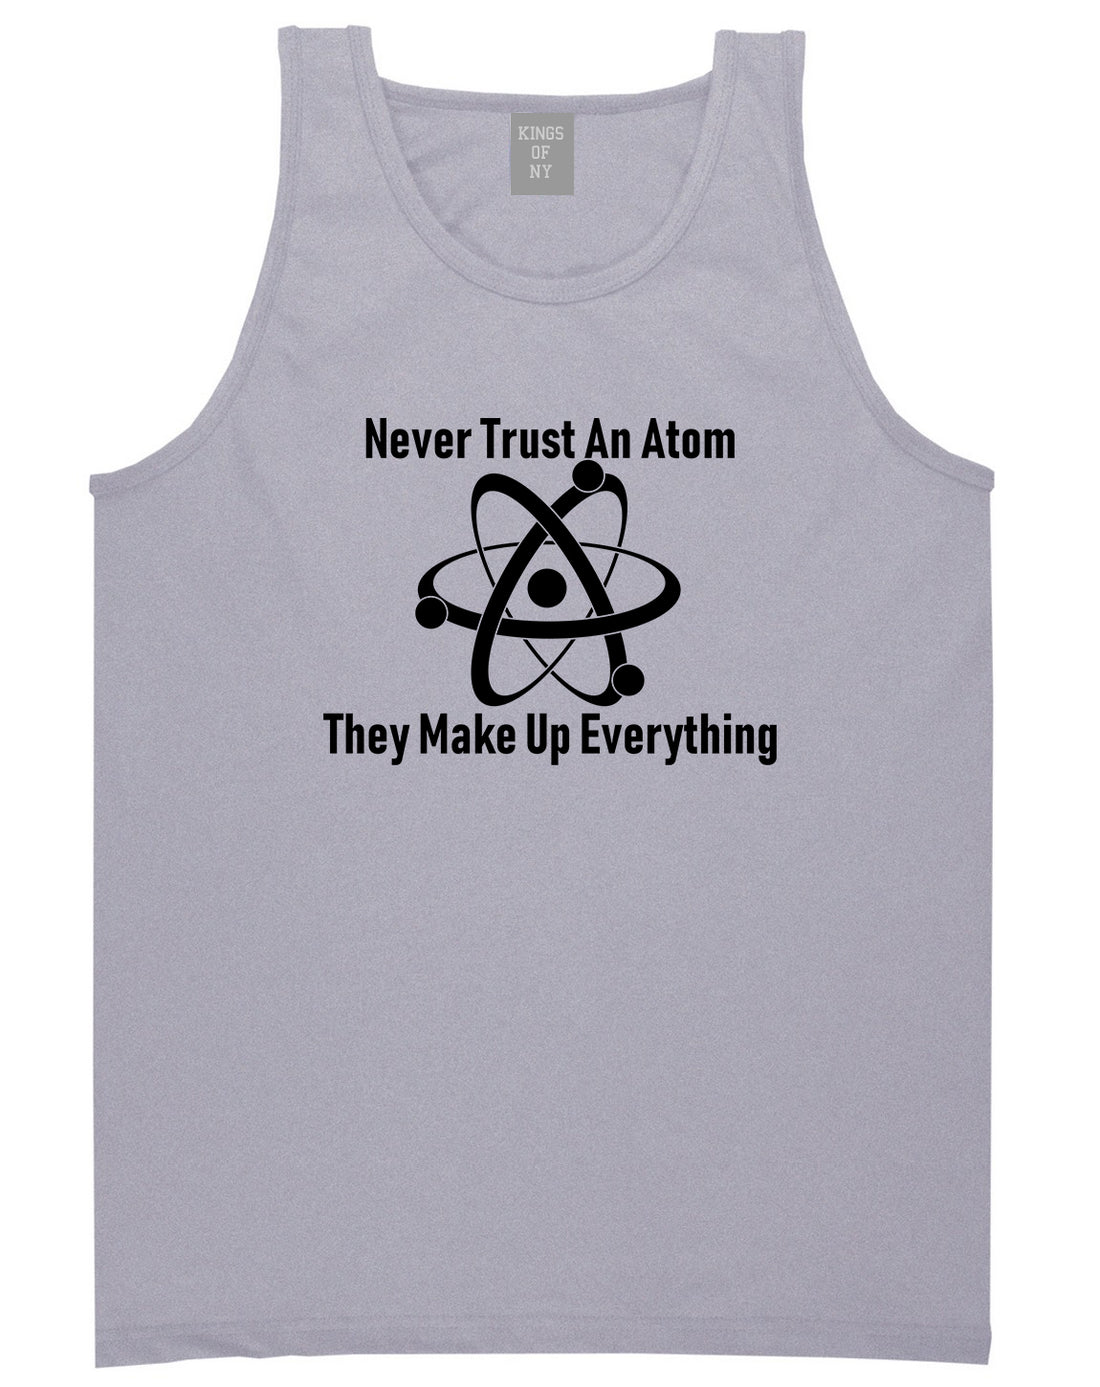 Never Trust An Atom They Make Up Everything Funny Mens Tank Top T-Shirt Grey